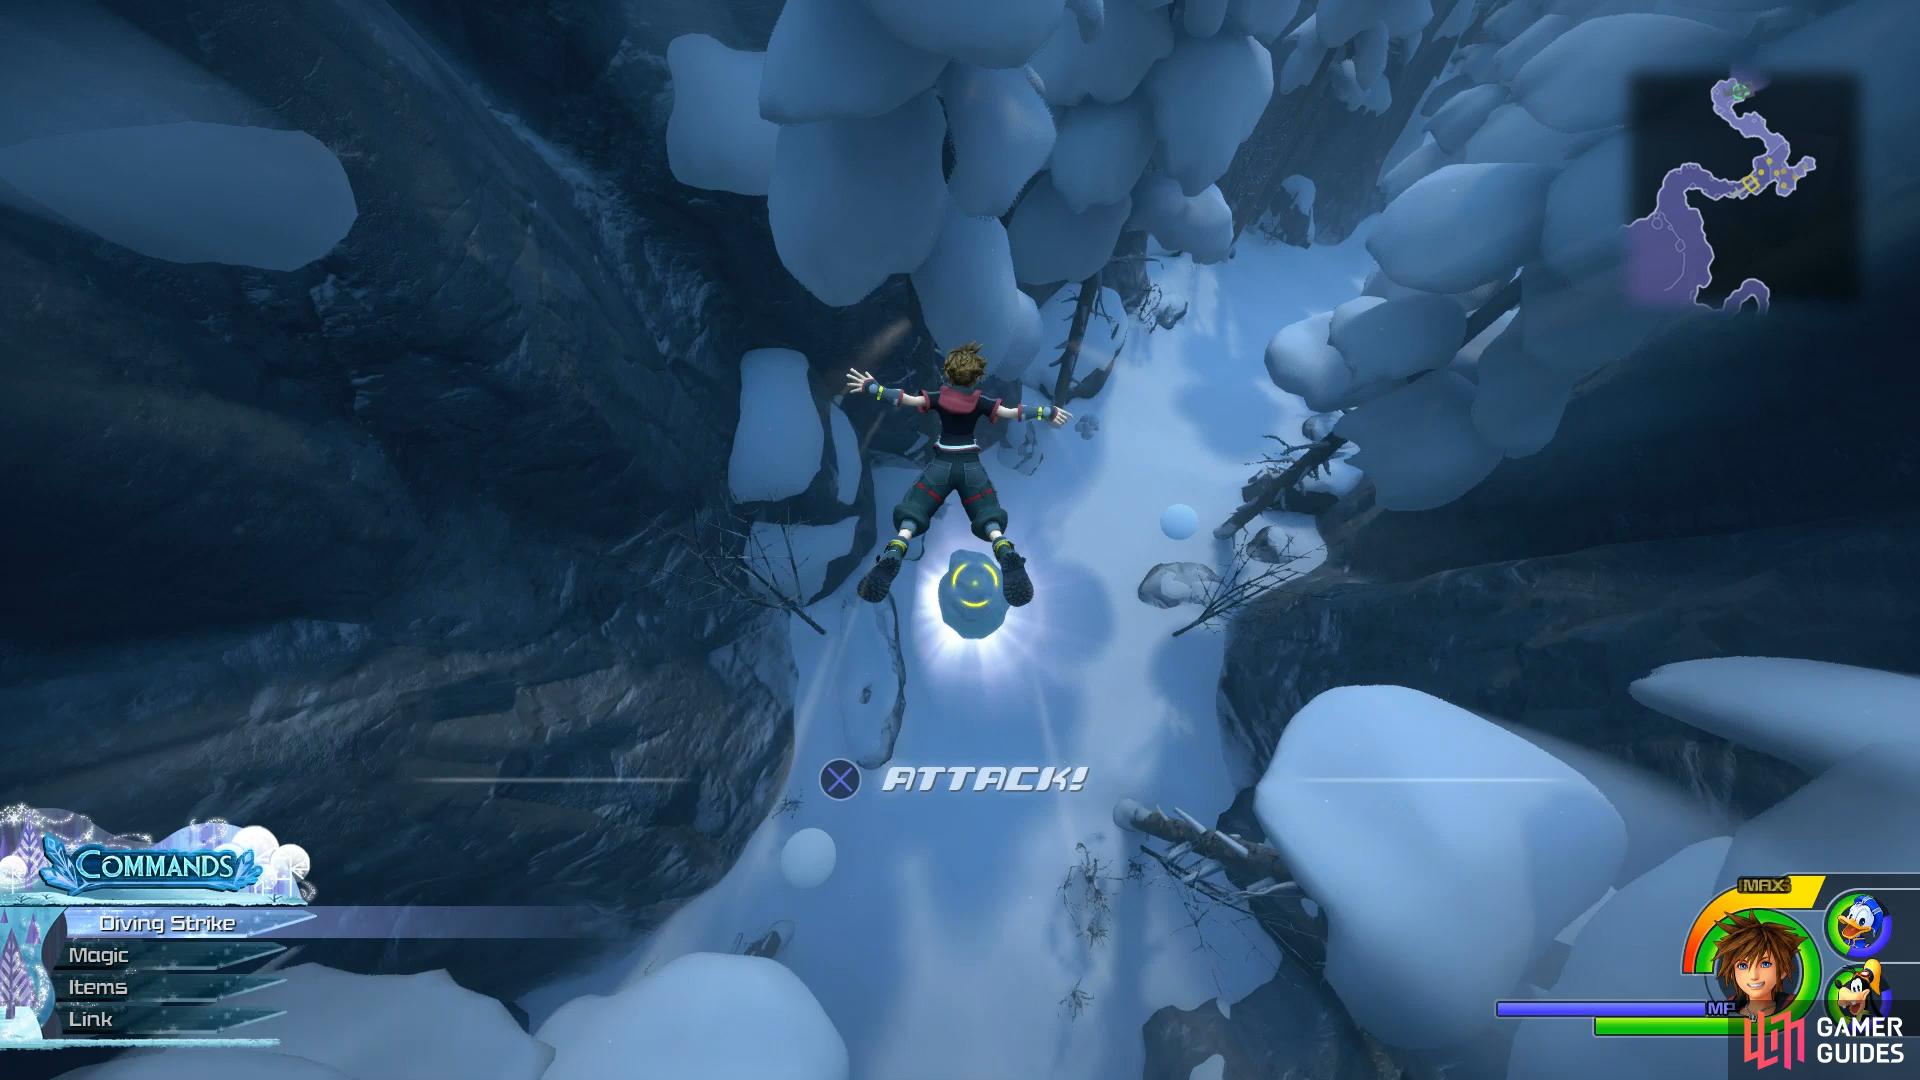 Strike the ice while falling to reveal the chest.